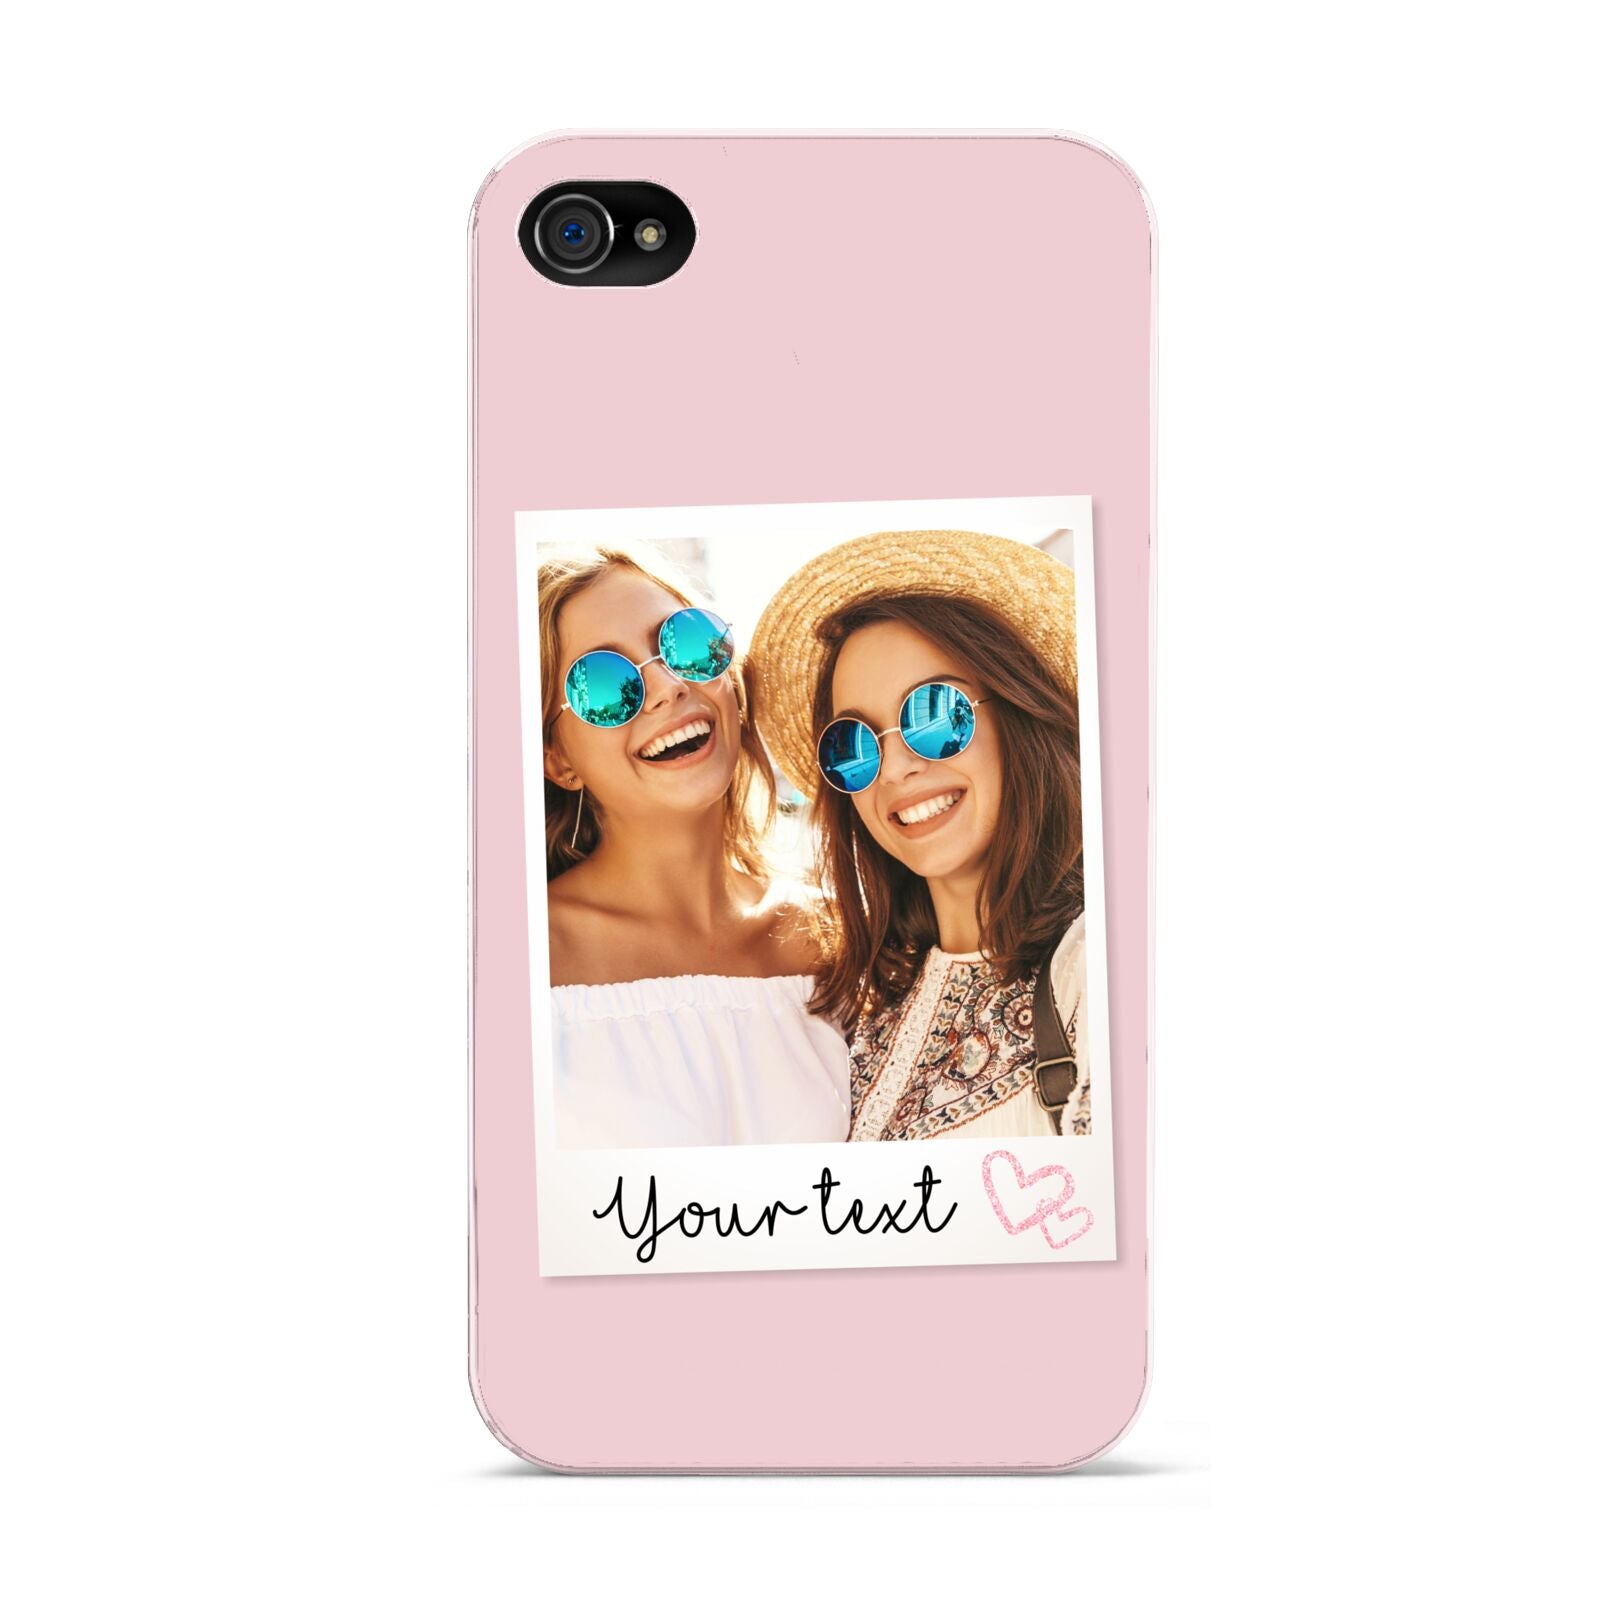 Personalised Best Friend Photo Apple iPhone 4s Case